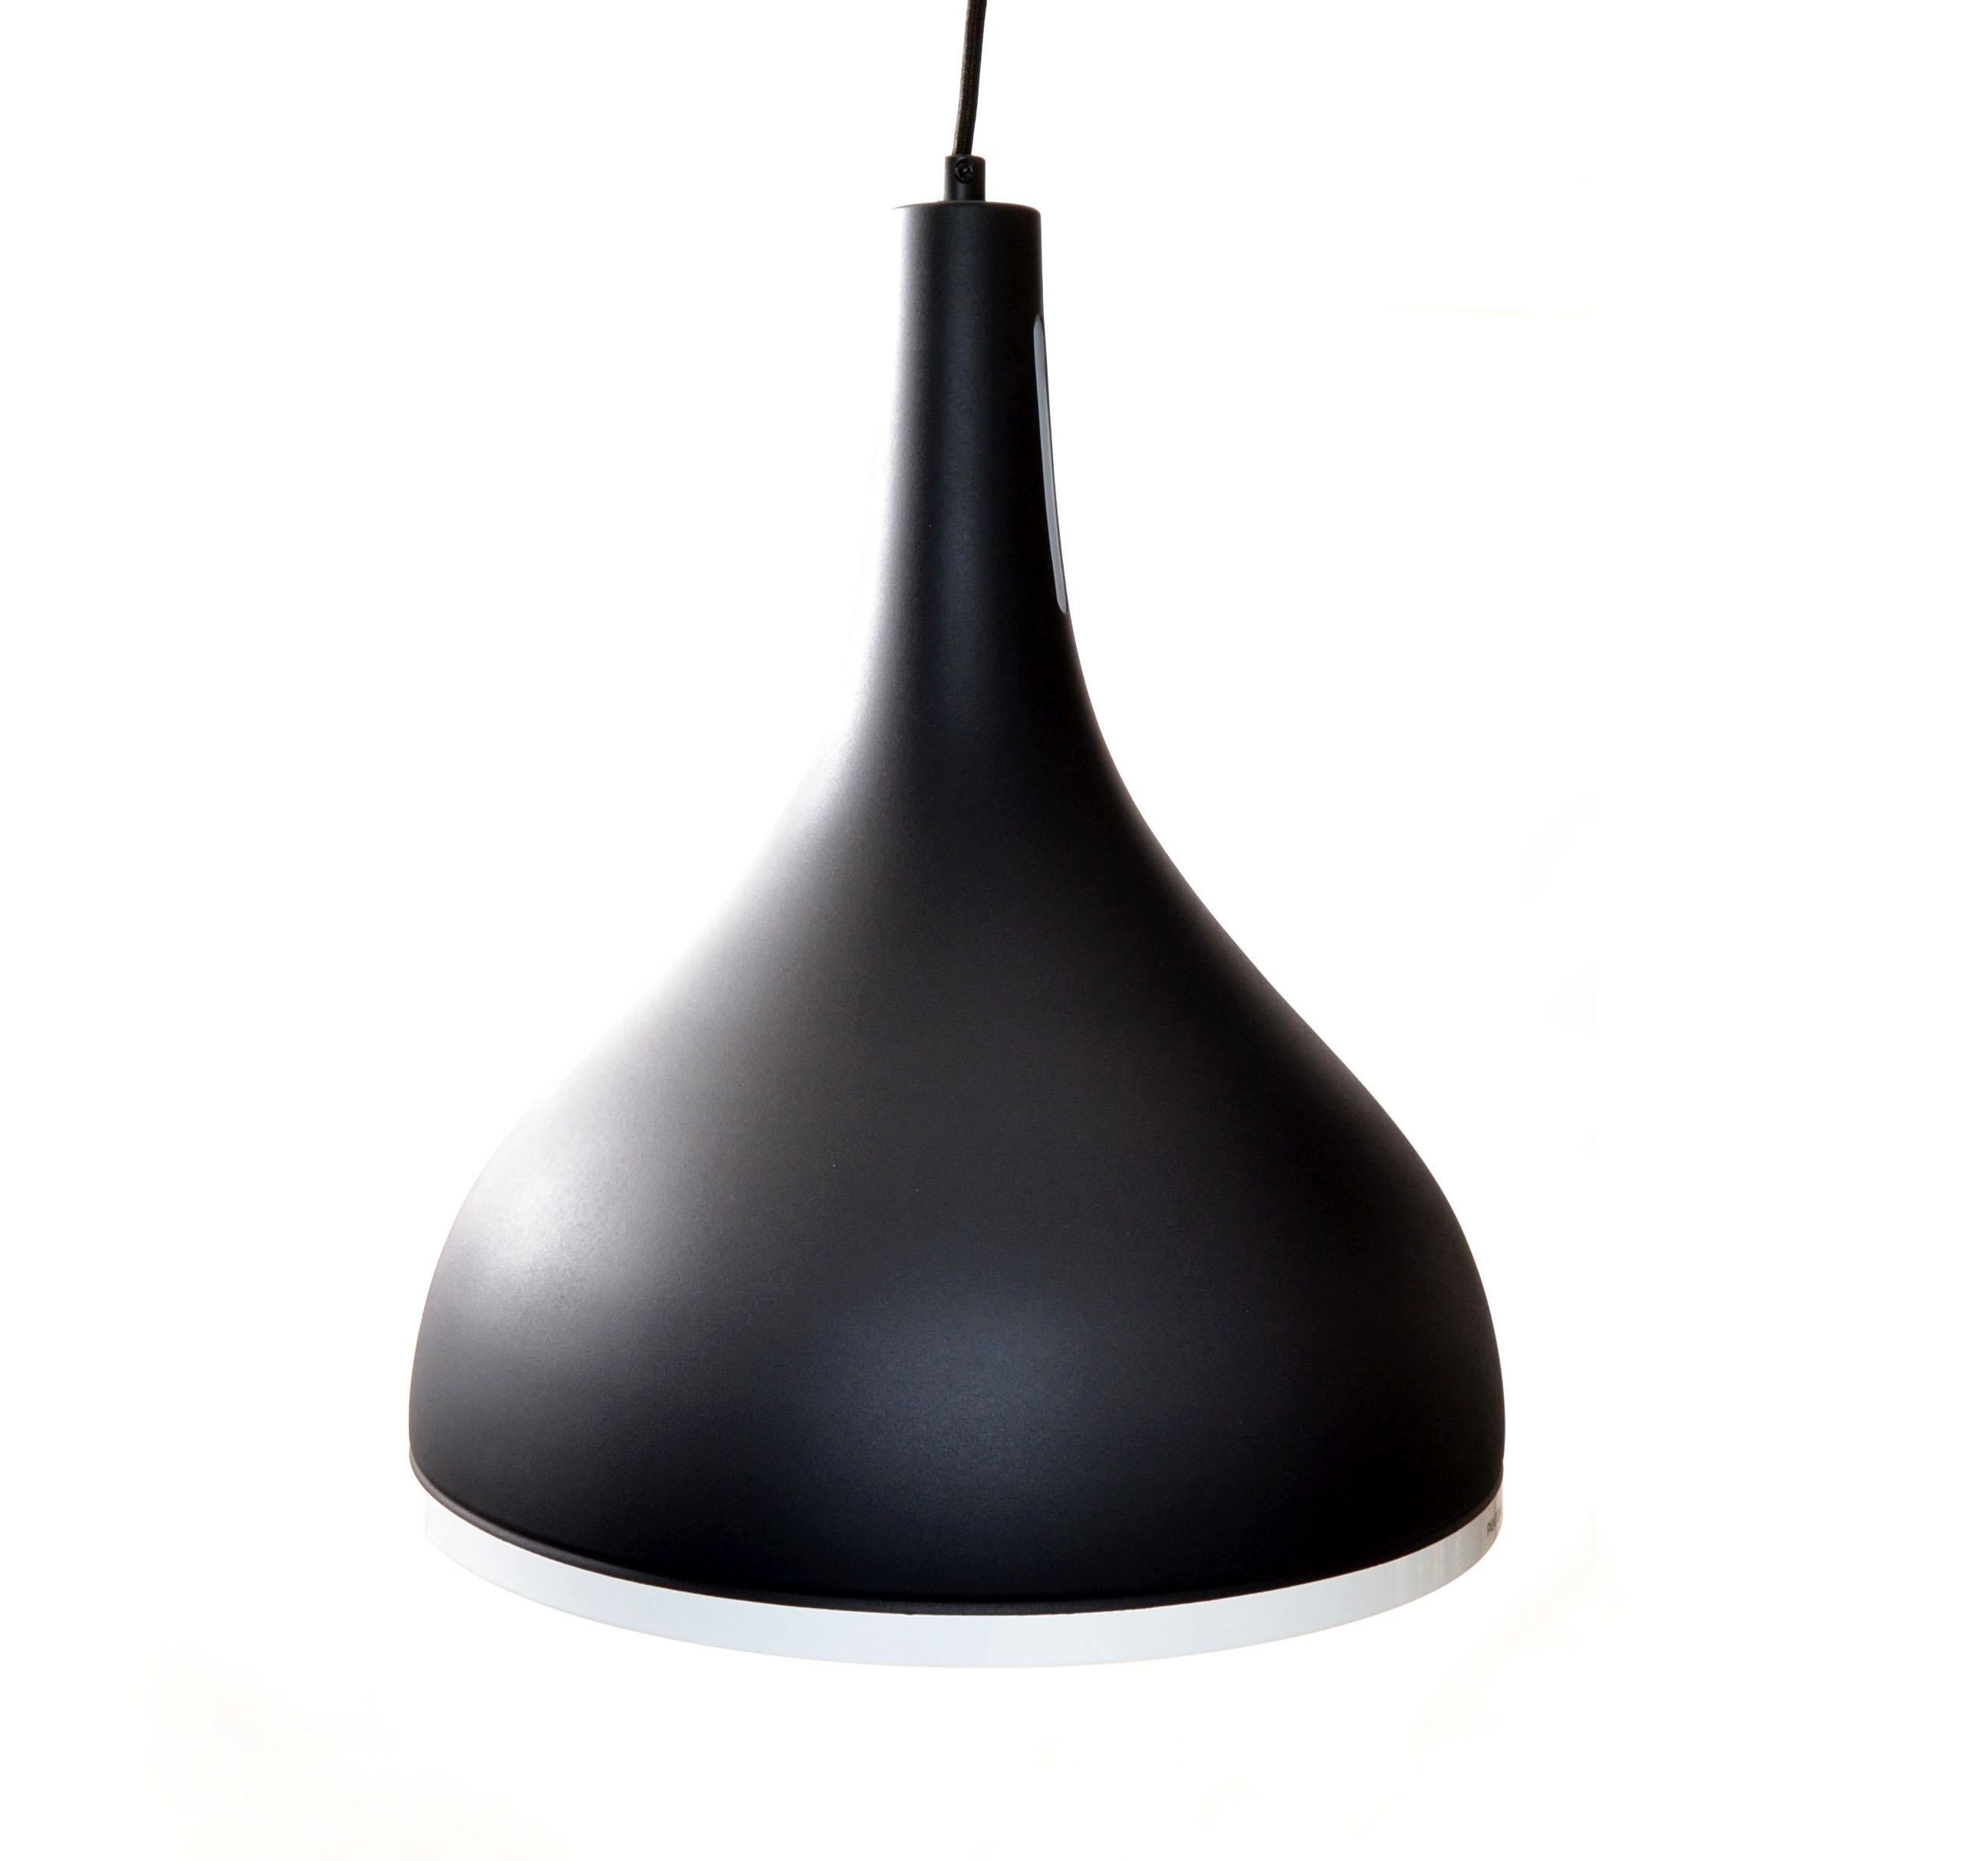 One of Six Pantone Black & White adjustable Pendant Light, Lamp, Ceiling Light Fixture.
PRICED BY ITEM.
ETL Listed and takes a regular 100watts or LED light bulb.
Never used, come in original Box.